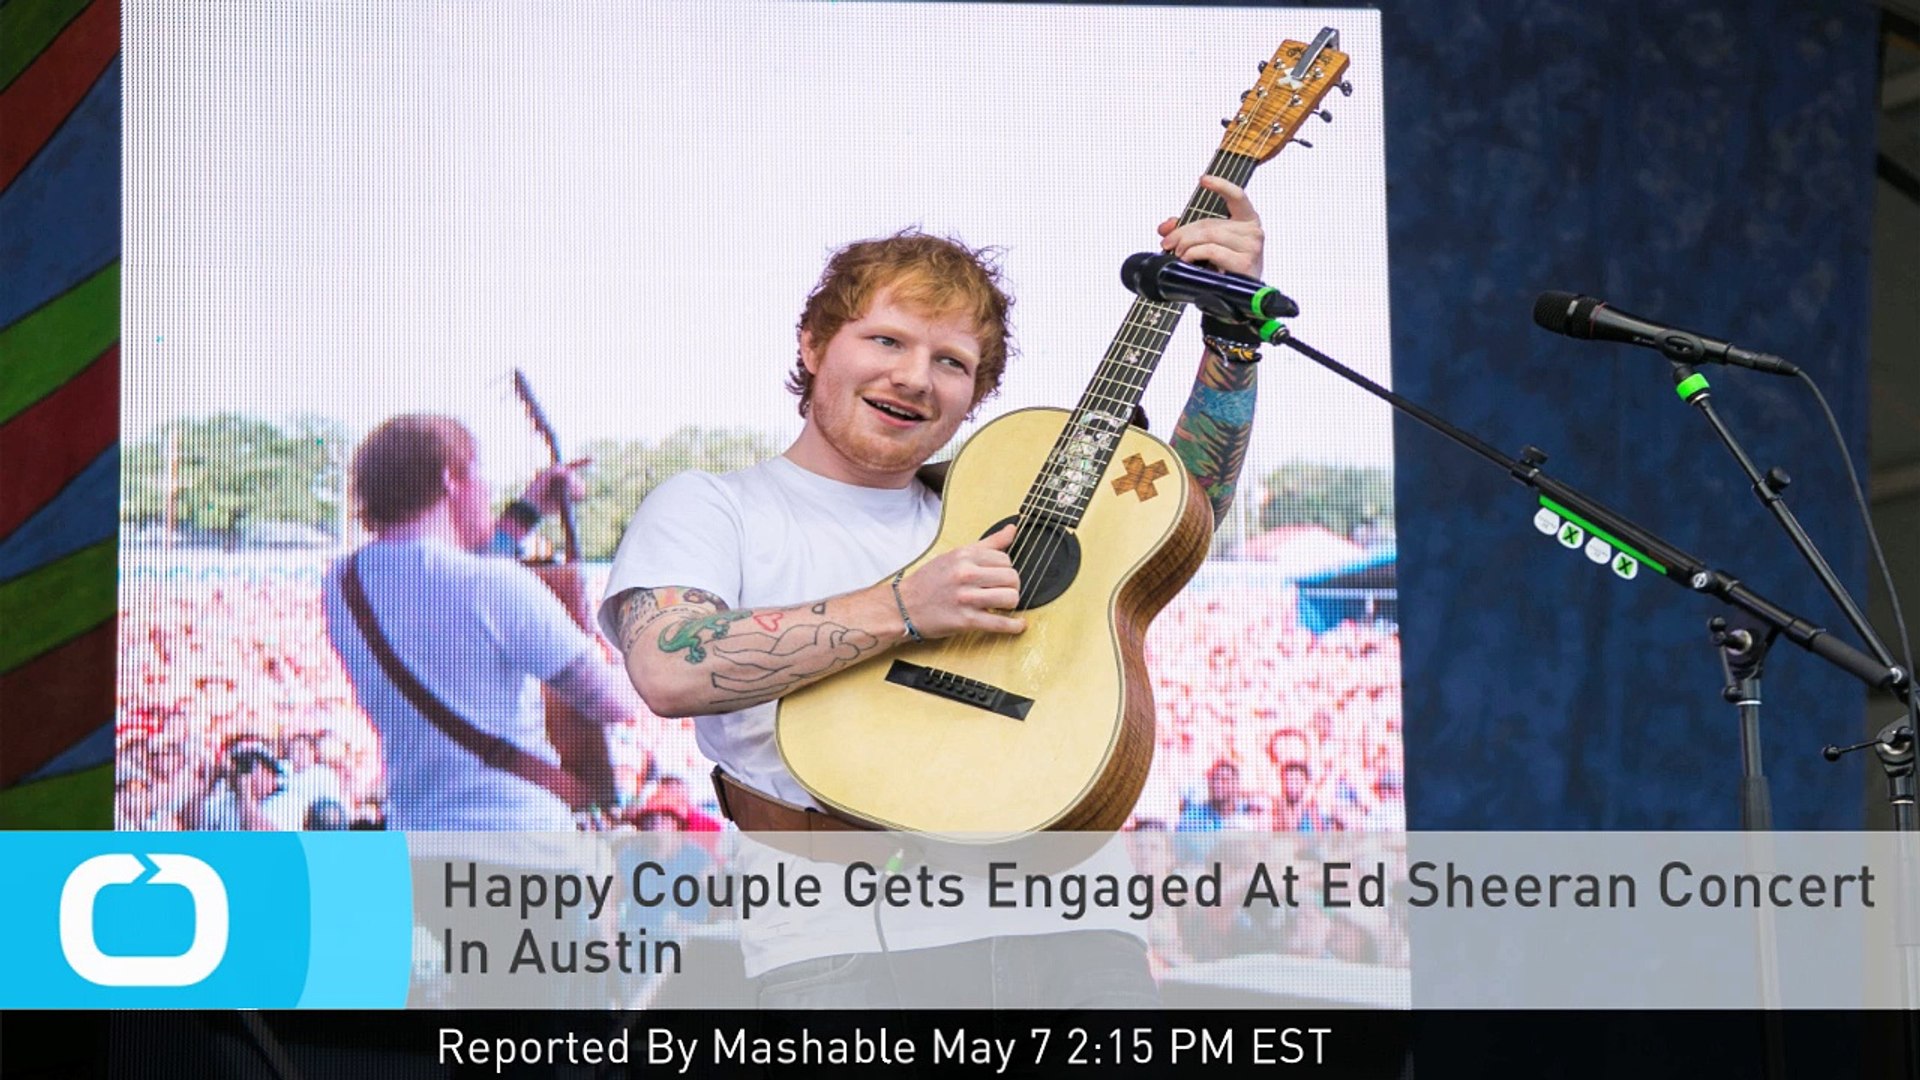 Happy Couple Gets Engaged At Ed Sheeran Concert In Austin